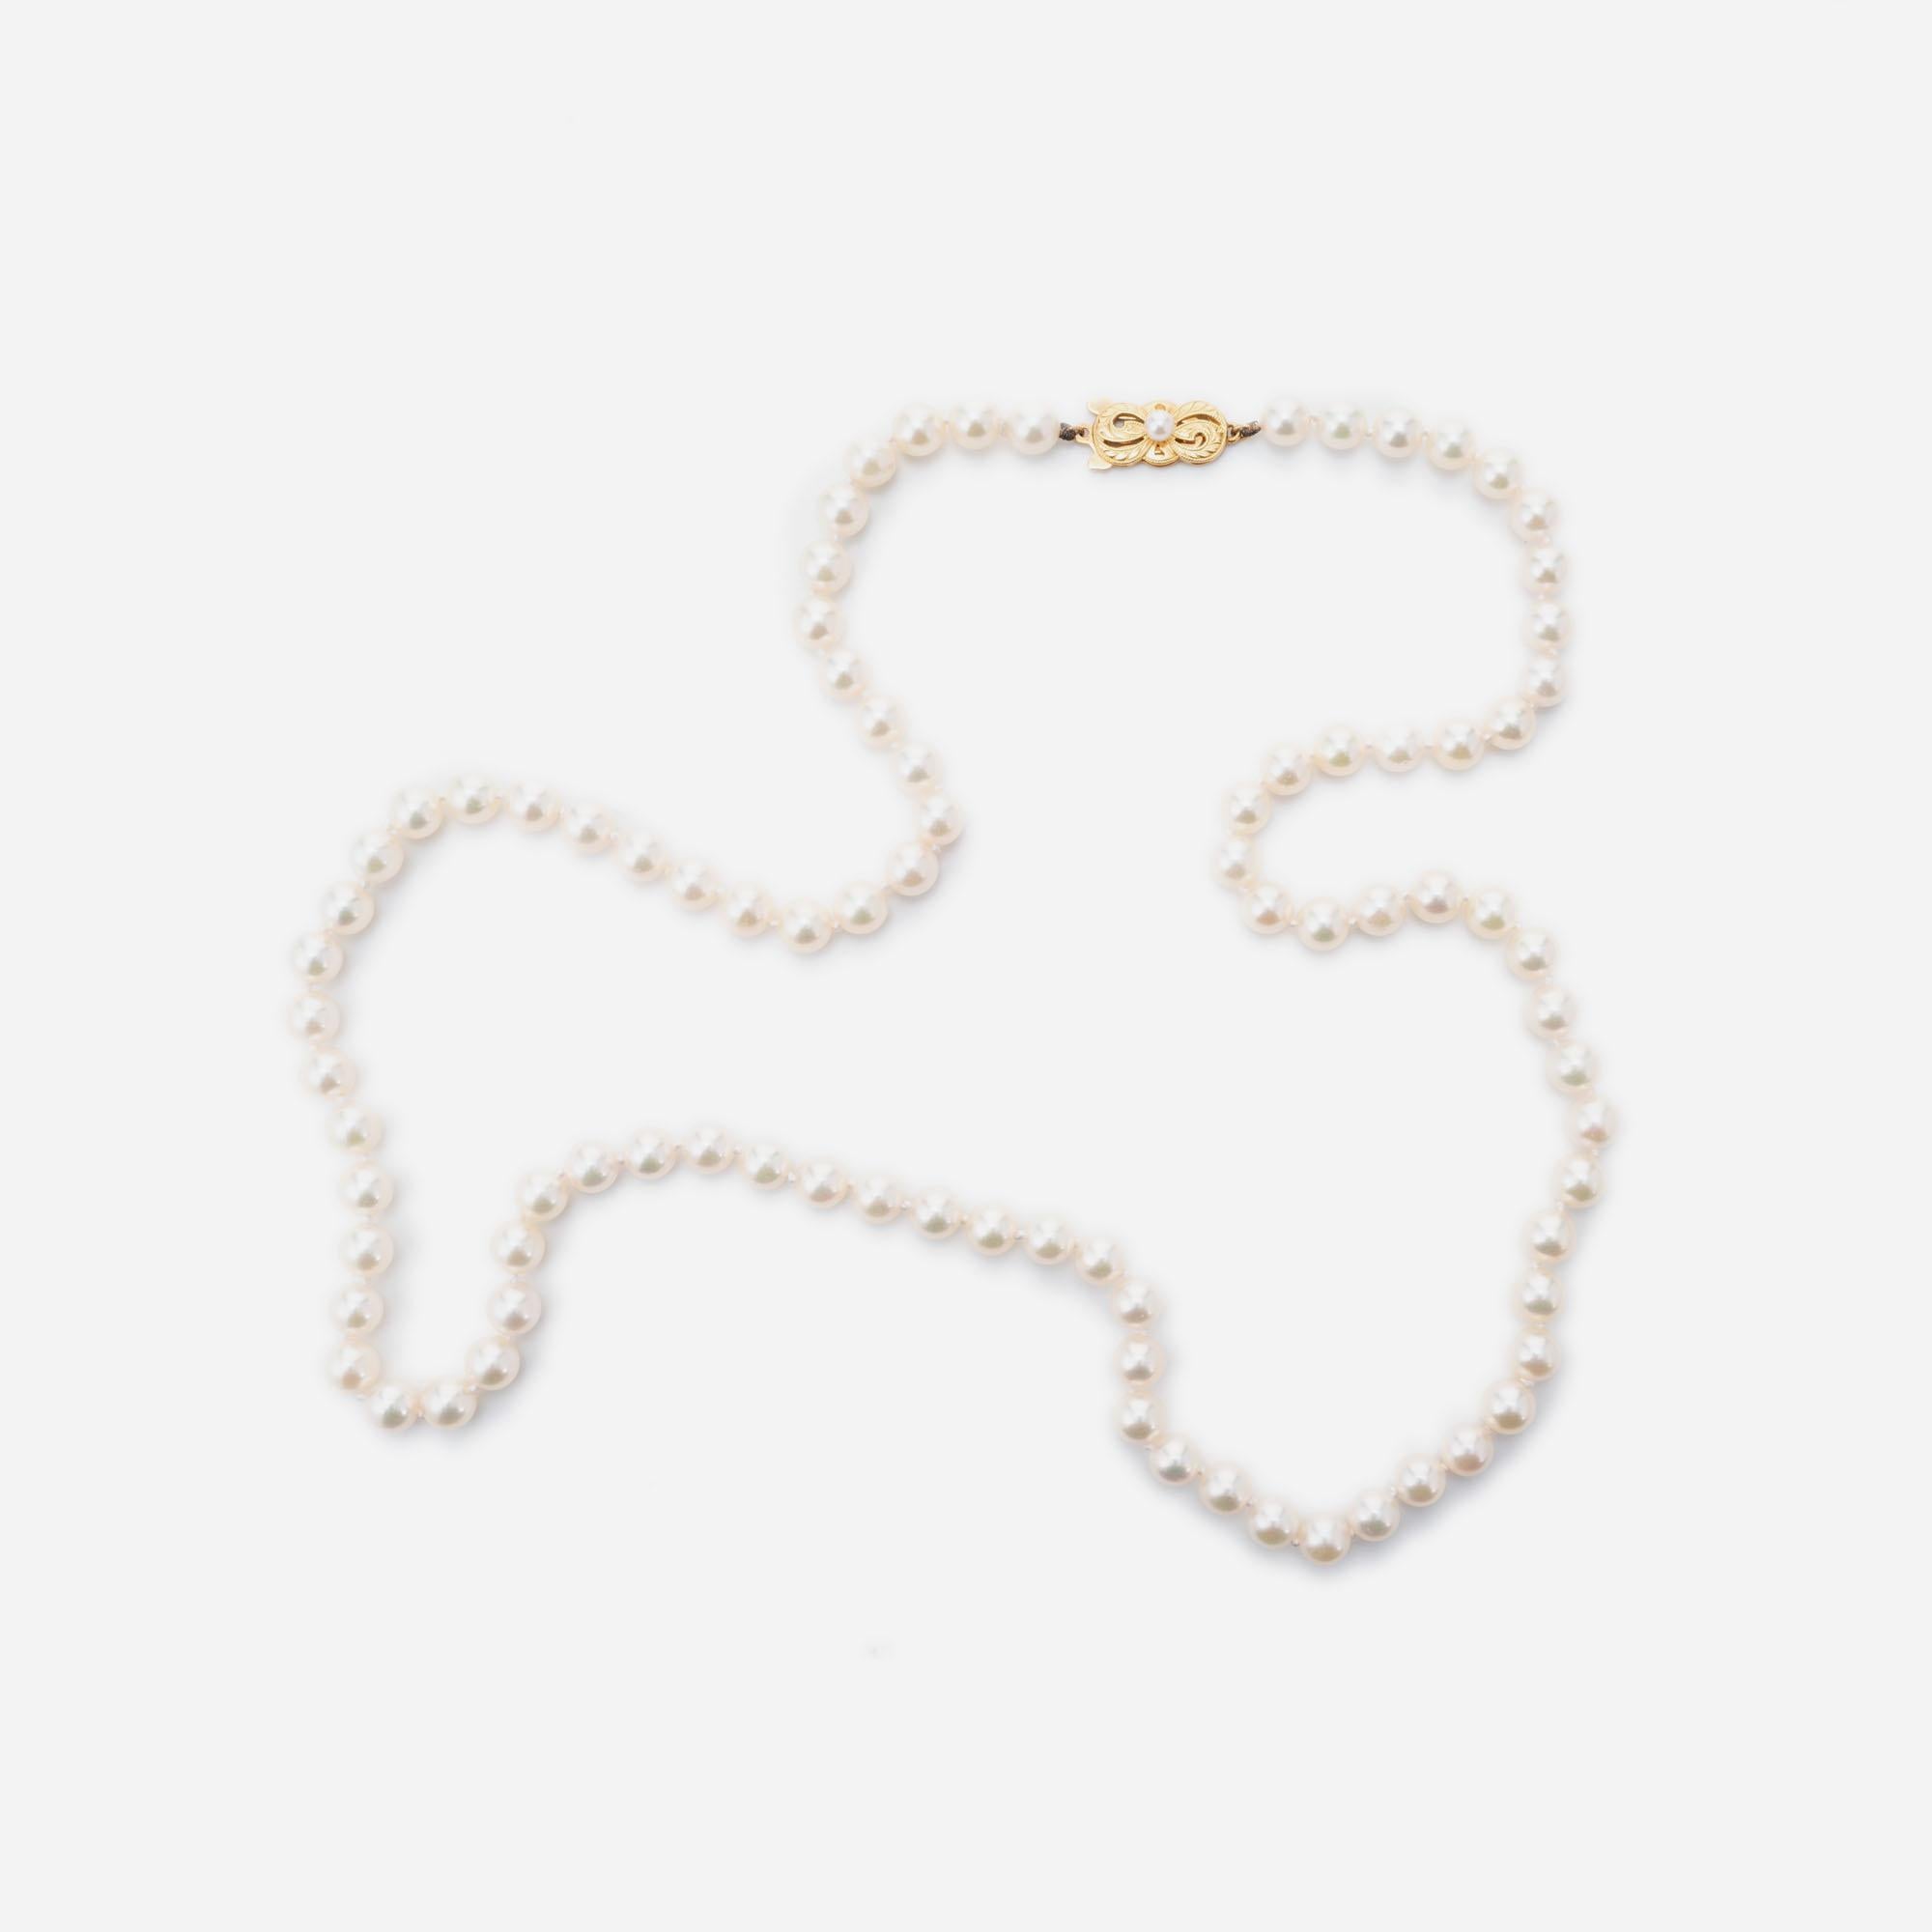 Mikimoto 24 Inch cultured pearl necklace with a 18k yellow gold catch

87 cultured crème pearls, 6.3-6.5mm
1 cultured crème pearl, 3.5mm
18k yellow gold 
Stamped: 750
Hallmark: M
32.5 grams
Length: 24 Inch
Width: 6.3mm
Depth: 6.4mm
